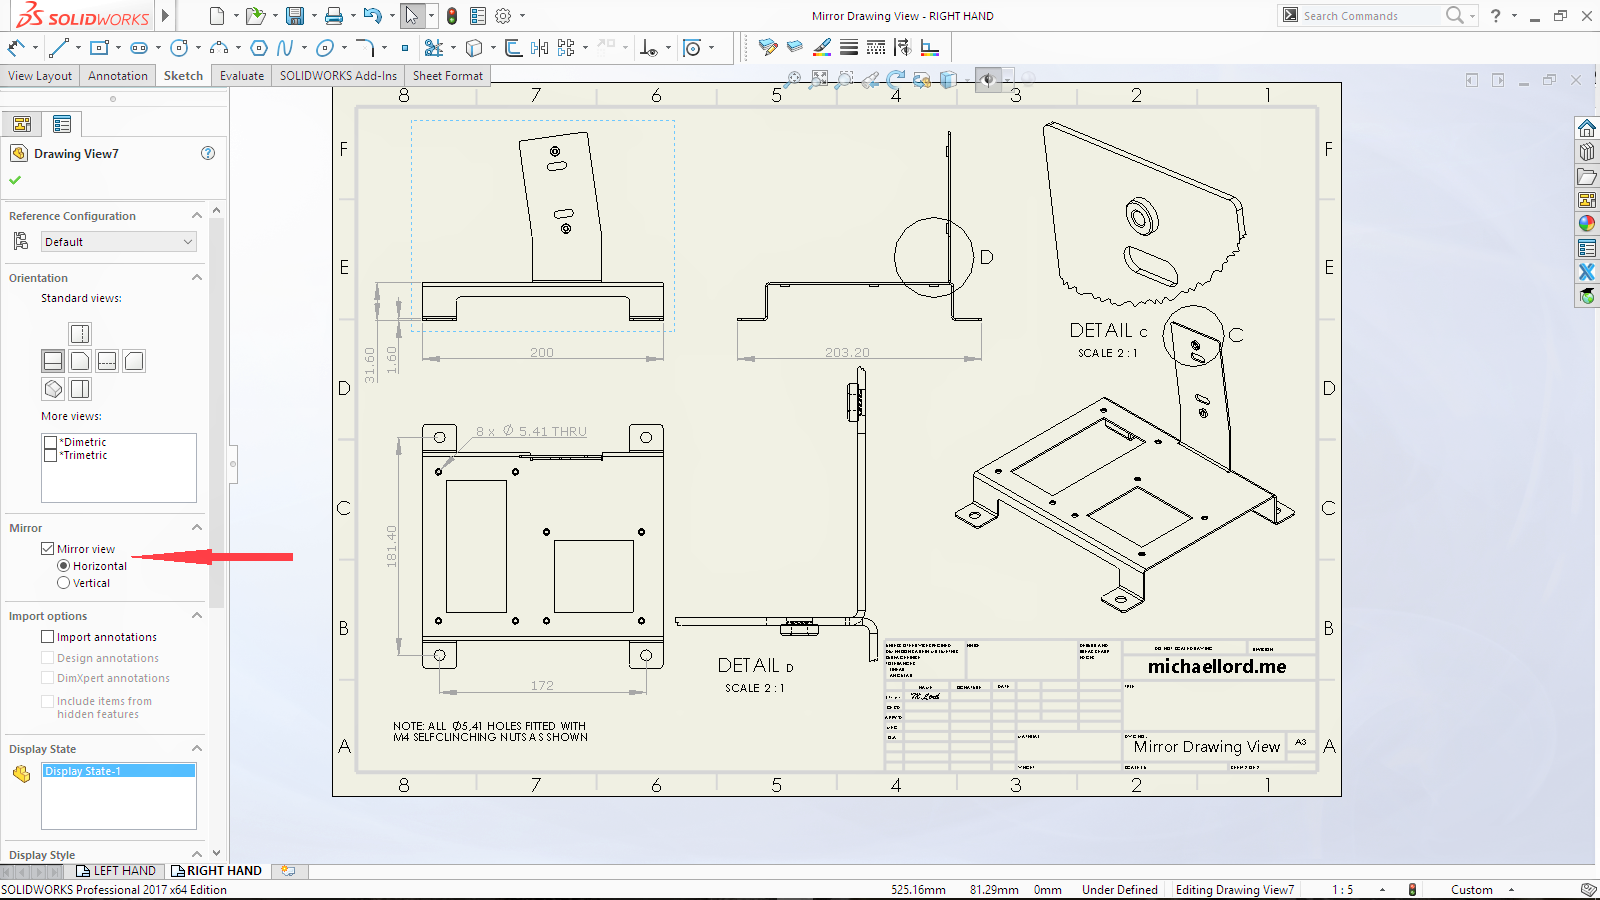 Sneak Peek: 15 Features coming in SOLIDWORKS 2015 - Sketch Relations on  Endpoints